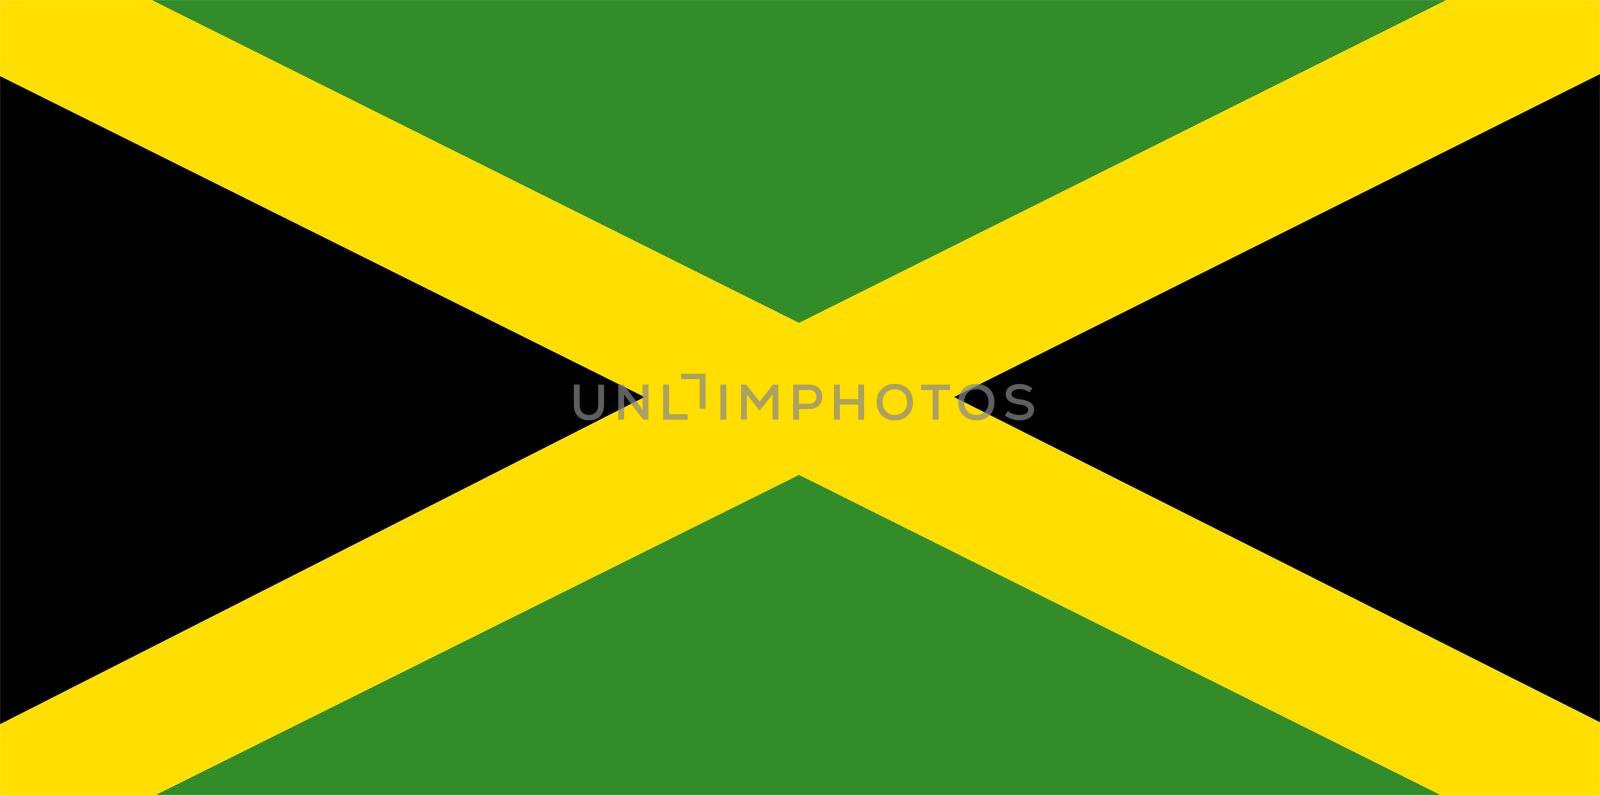 national flag of jamaica - computer generated image